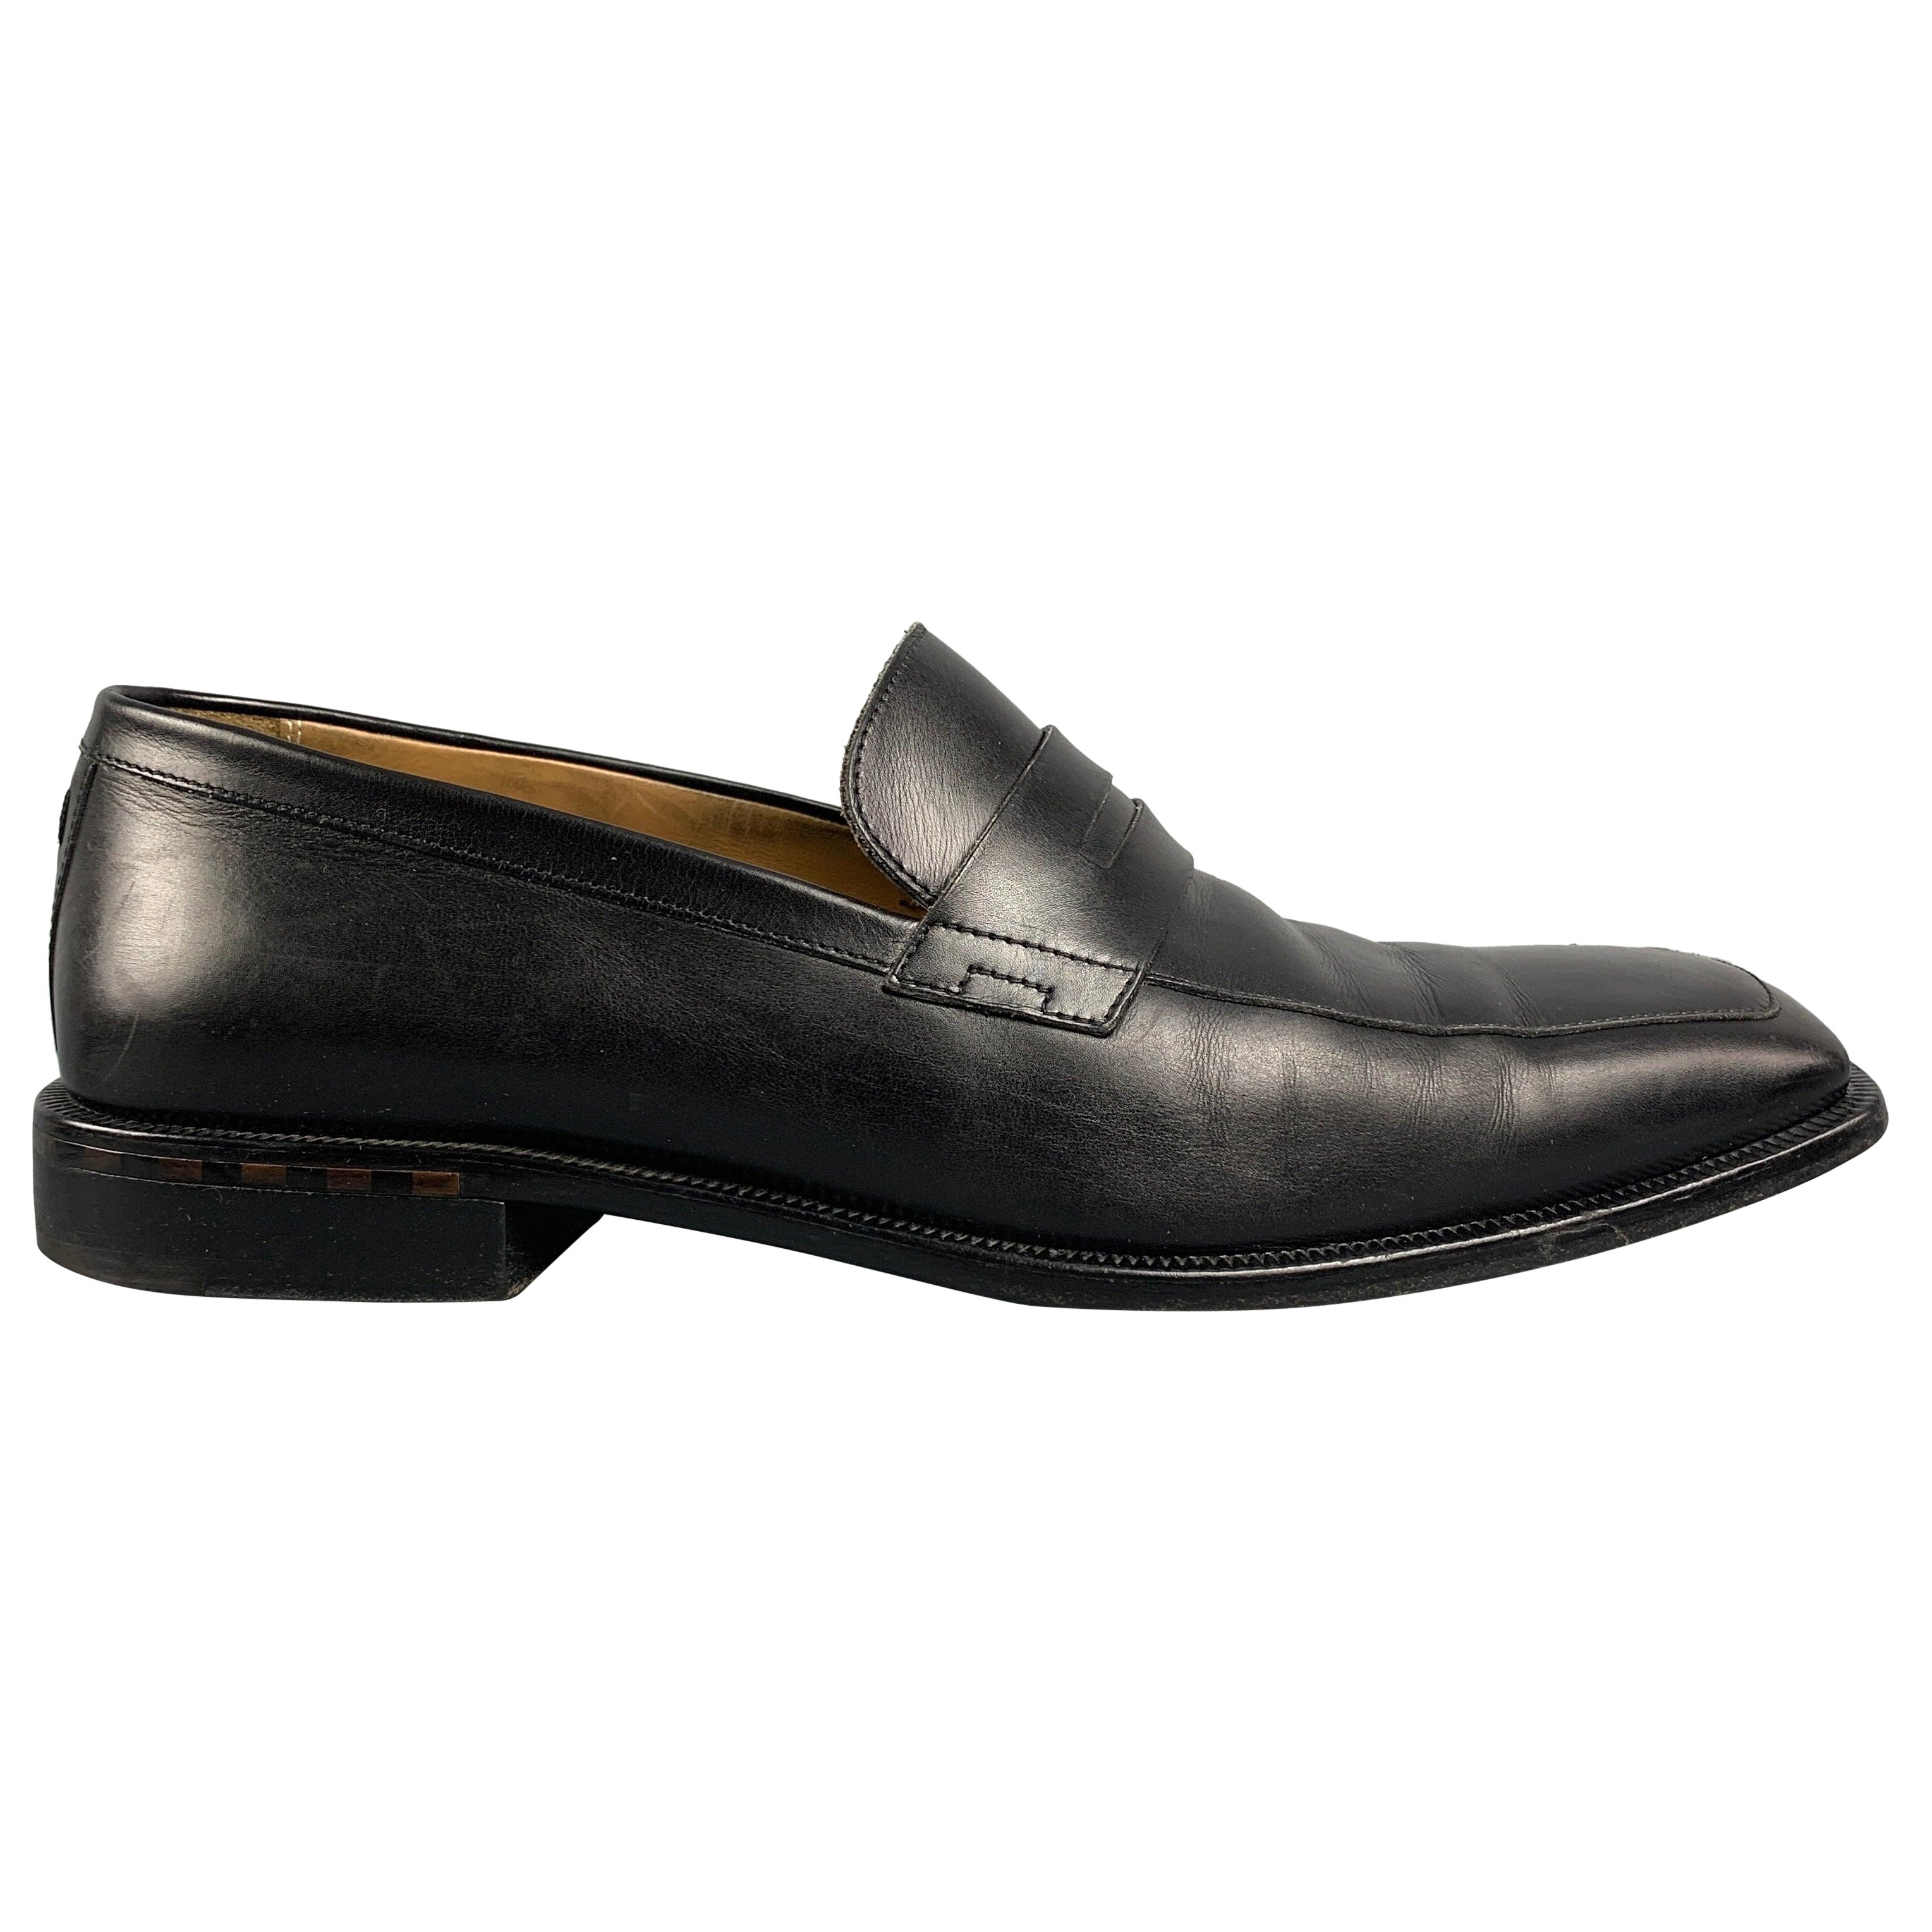 LOUIS VUITTON Size 10 Black Leather Square Toe Loafers For Sale